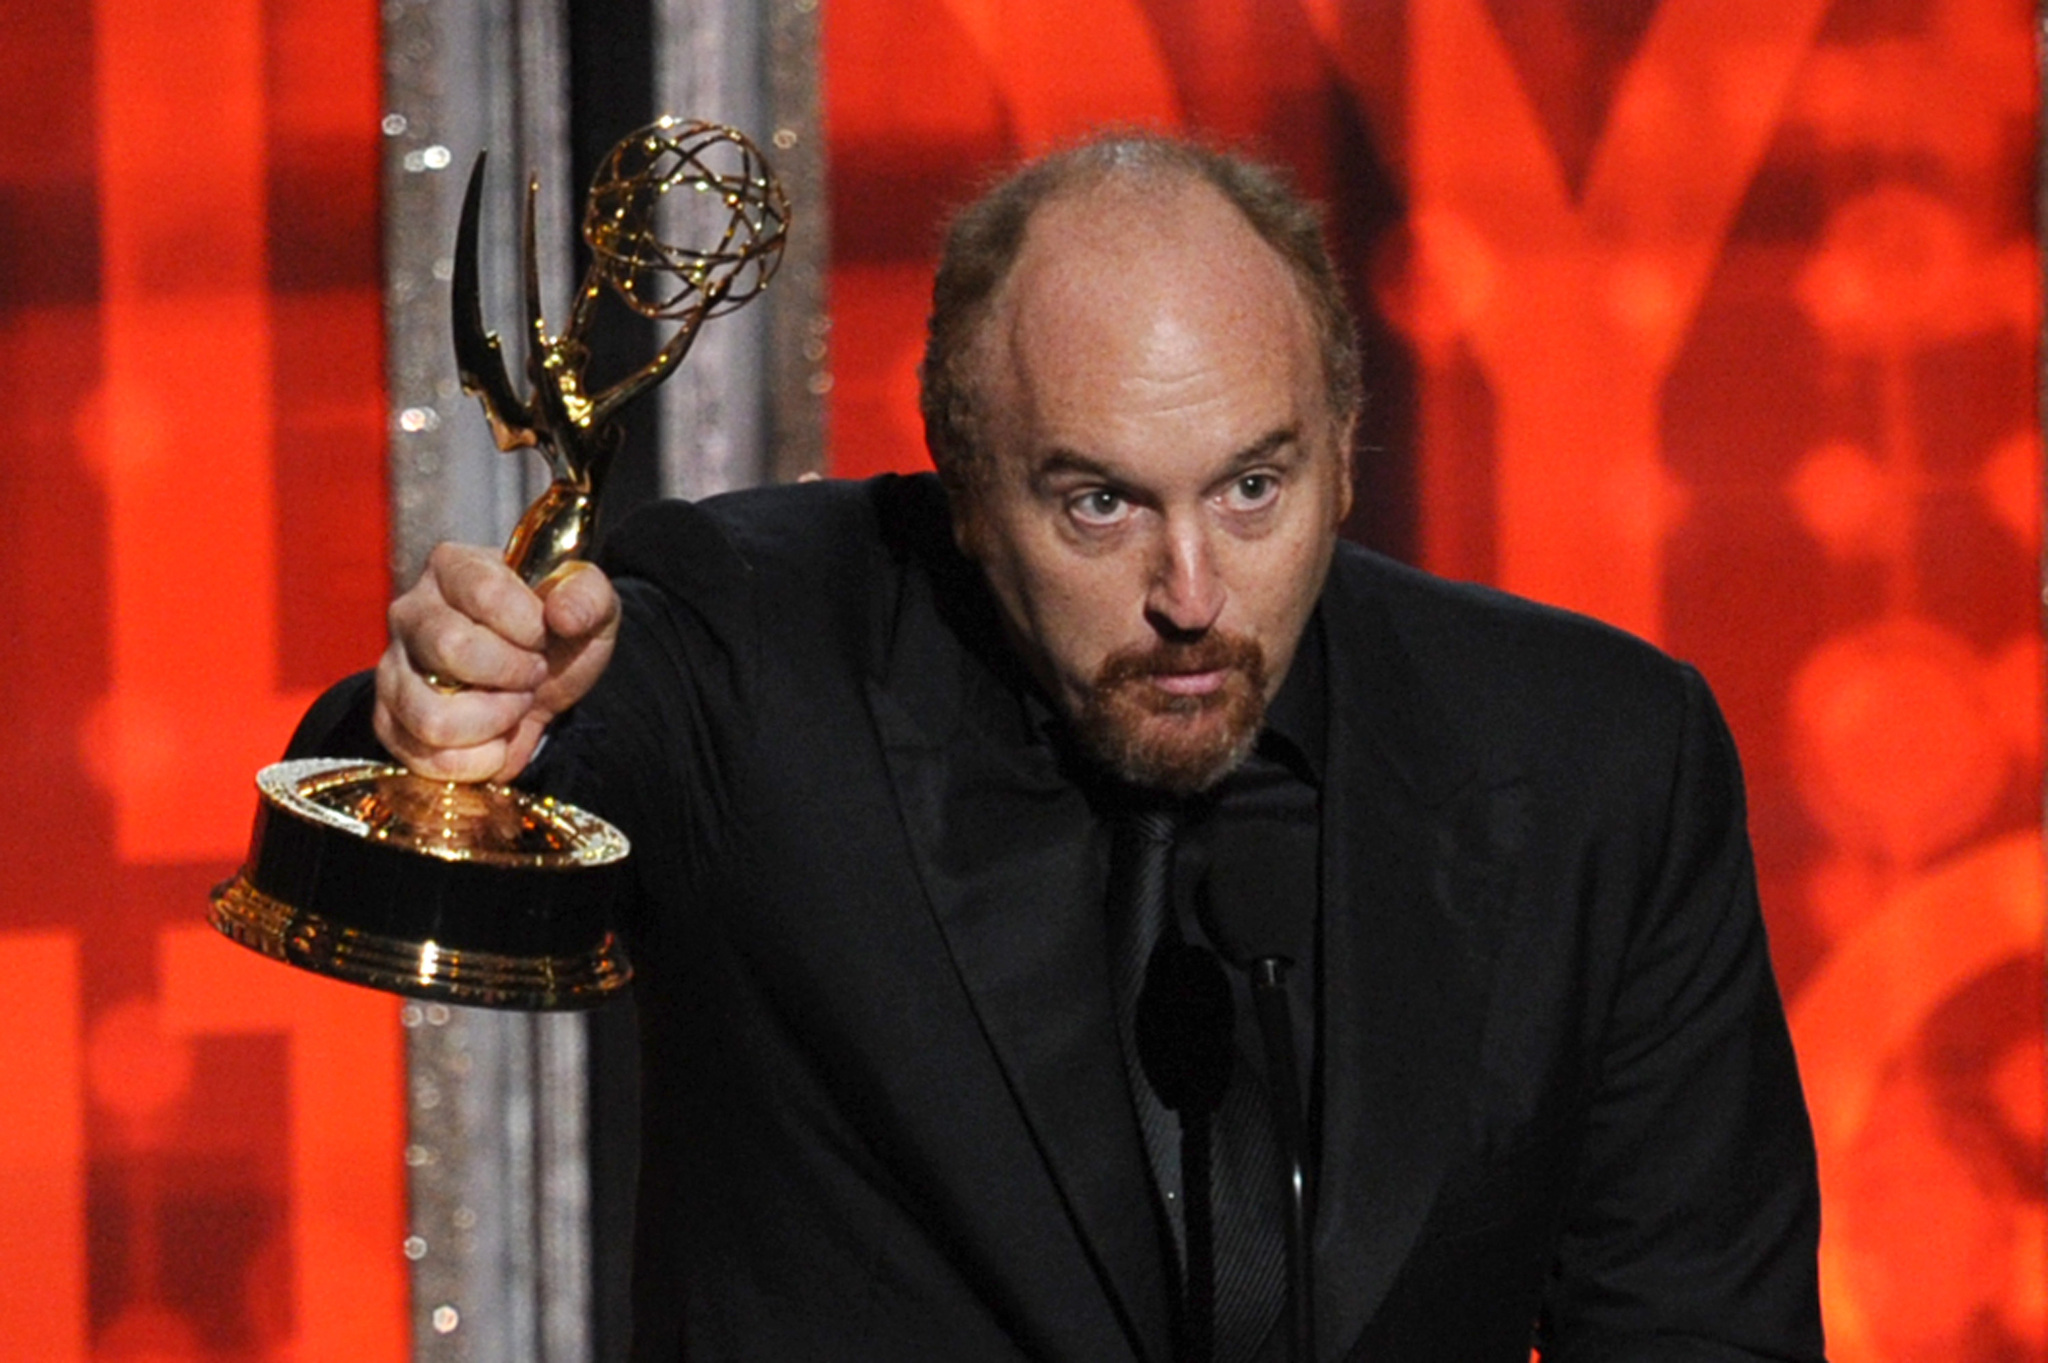 Louis C.K. at event of Louie (2010)